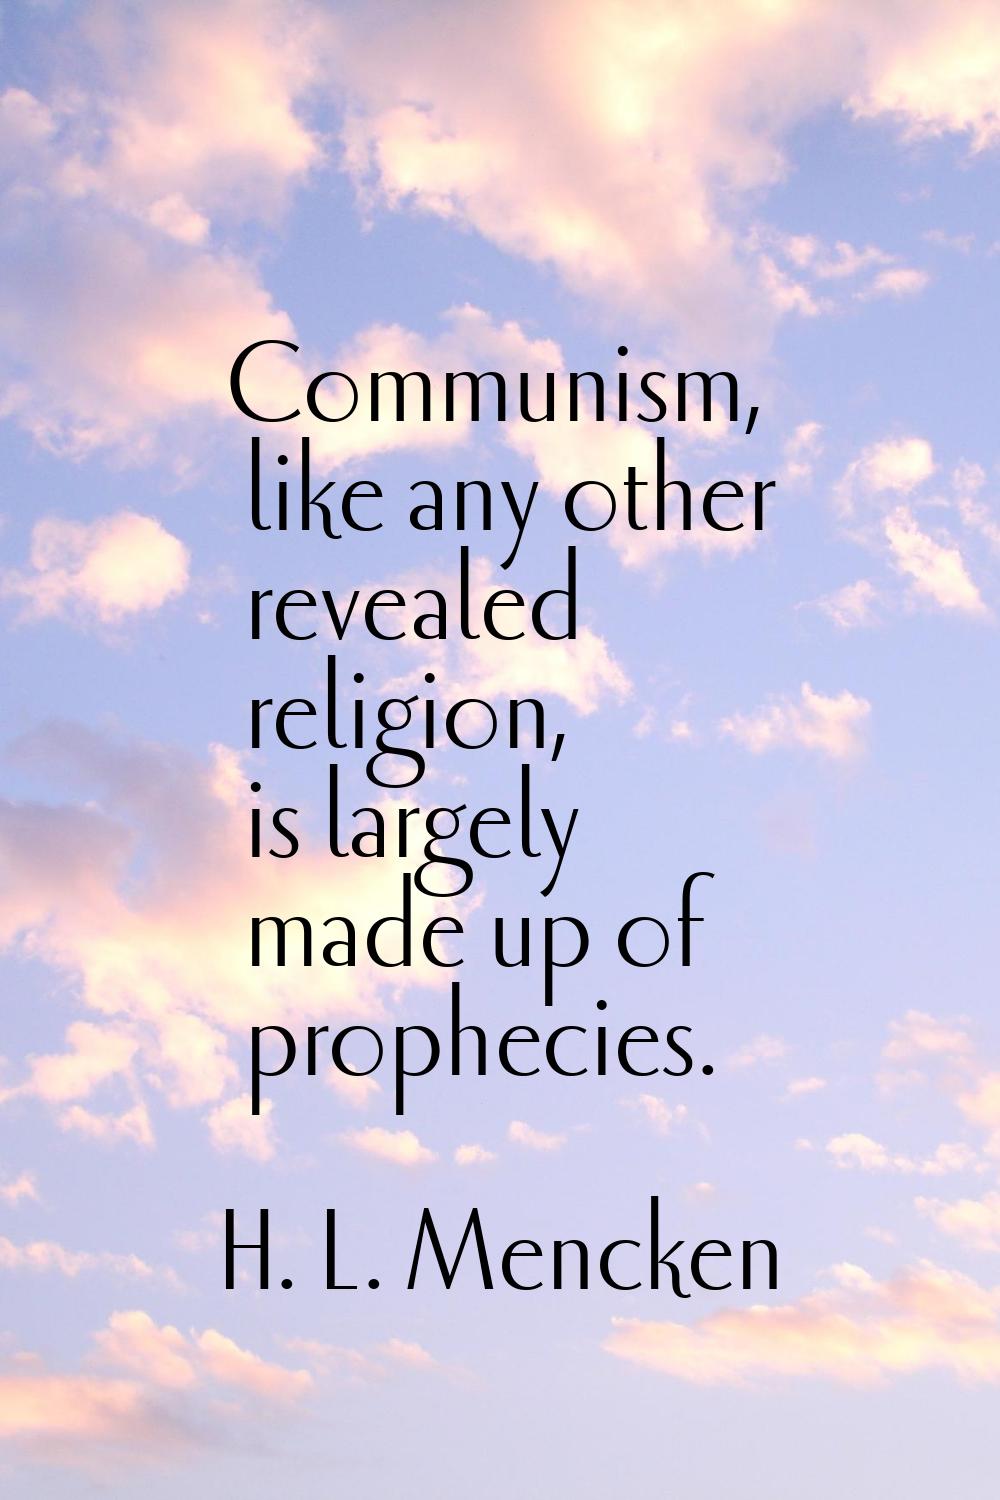 Communism, like any other revealed religion, is largely made up of prophecies.